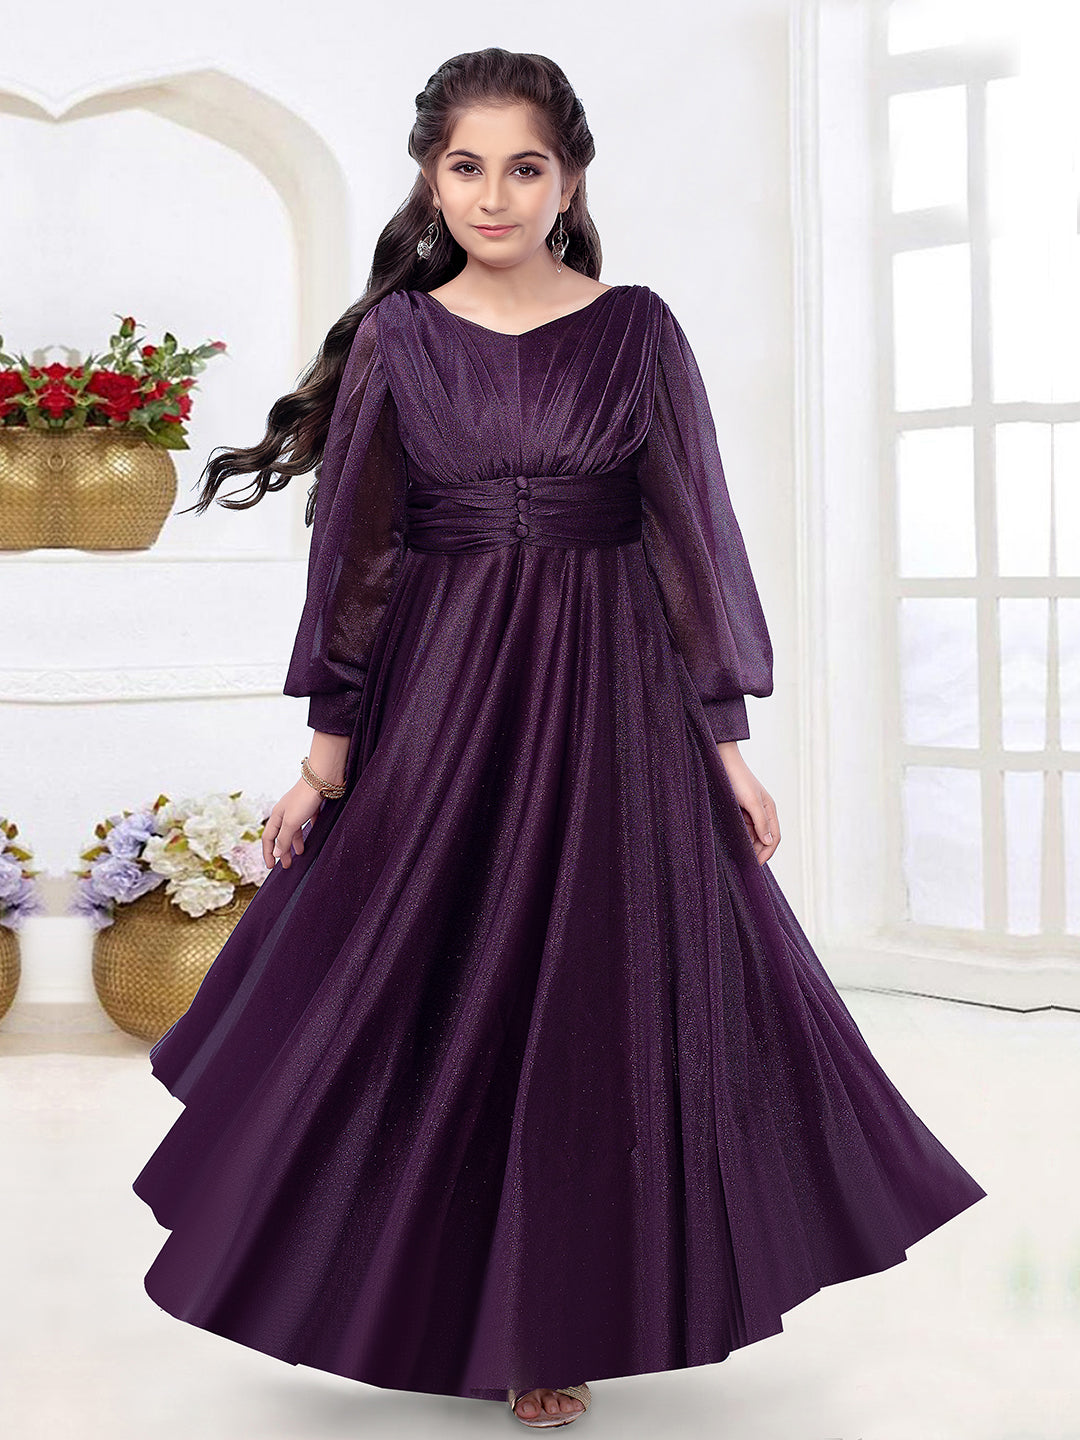 new gown for girls | baby girls gown | 5/6 years gown | 6/7 years gown |  7/8 years gown | 8/9 years gown | 9/10 years gown | 10/11 years gown |  11/12 years gown | 12/13 years gown | 13/14 years gown | 14/15 years gown |  15/16 years gown